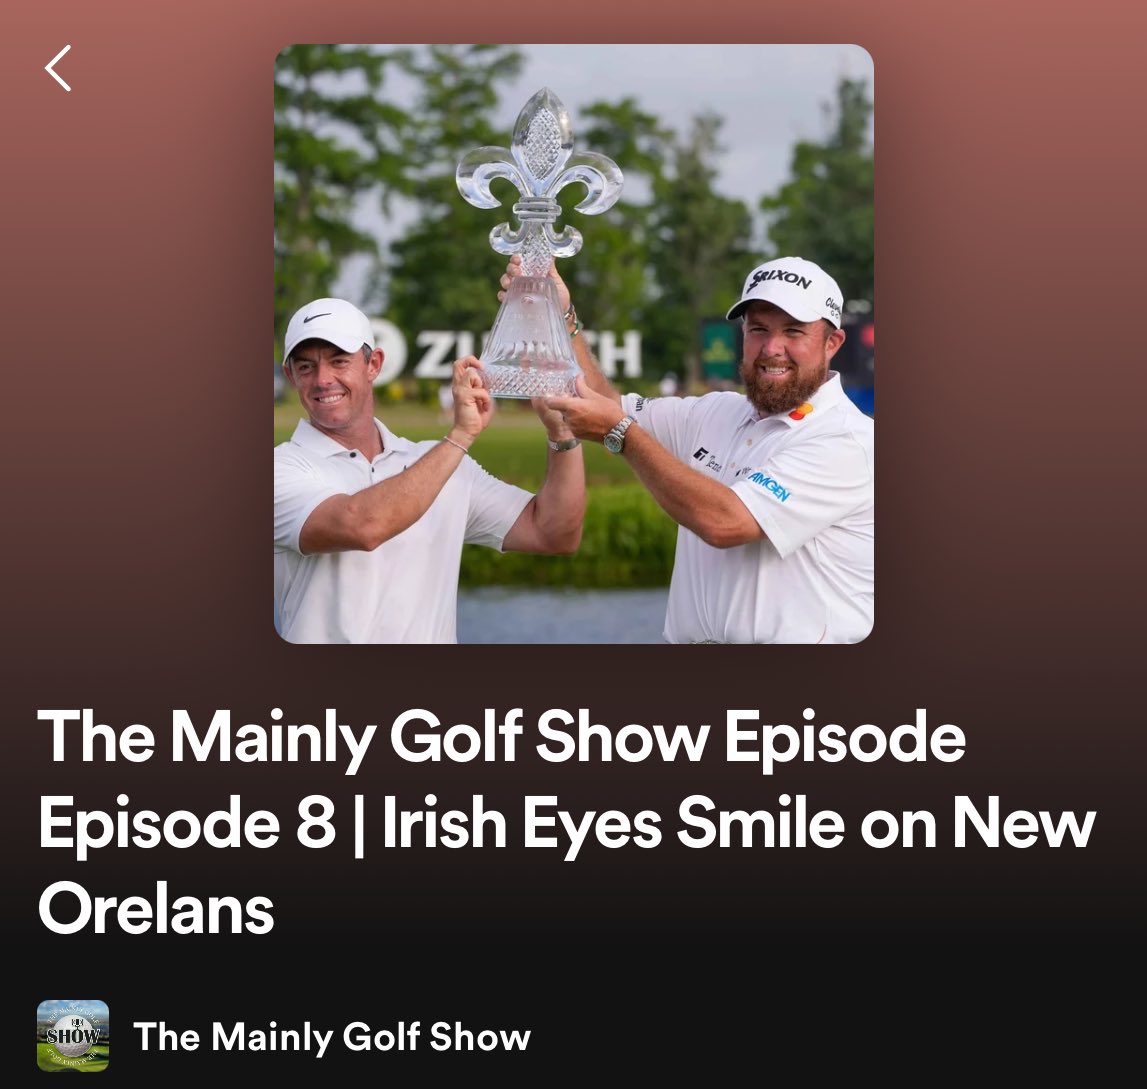 The latest episode of The Mainly Golf Show is live, reflecting back on the success of Shane Lowry and Rory McIlroy last week in New Orleans ⛳️ 👉 open.spotify.com/episode/6pNxj5…